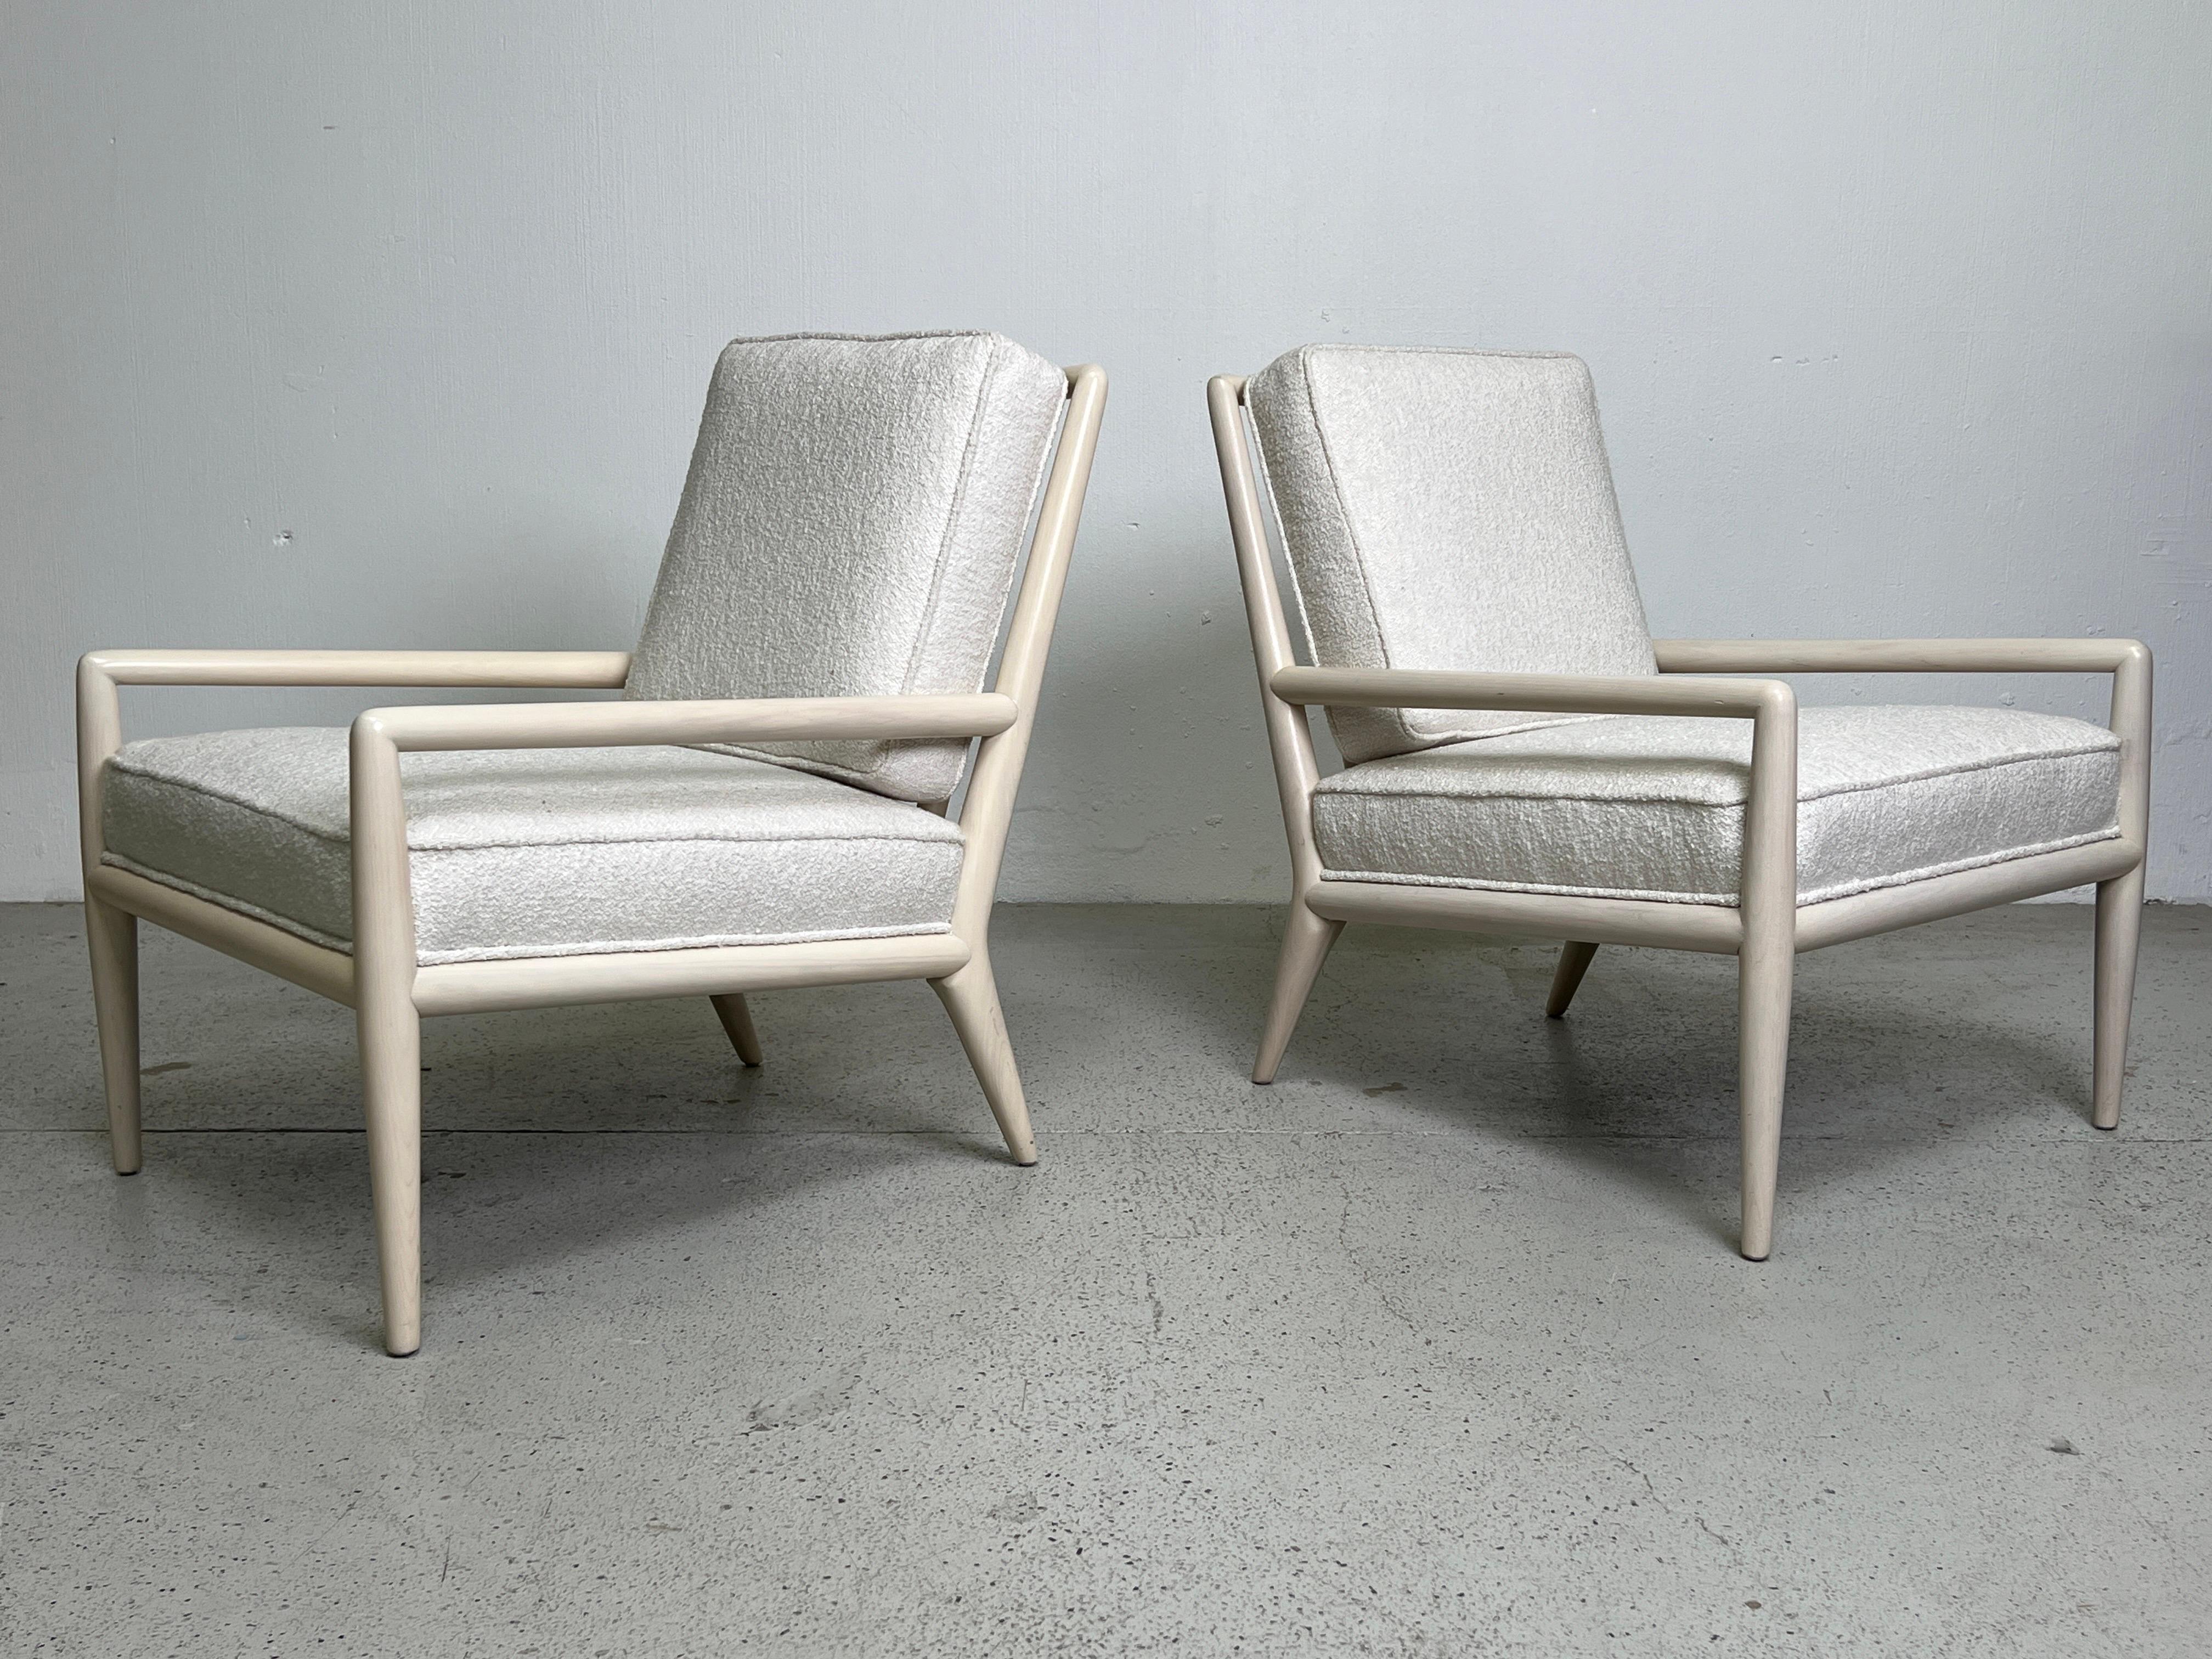 A pair of walnut lounge chairs with whitewashed frames designed by T.H. Robsjohn-Gibbings for Widdicomb. 